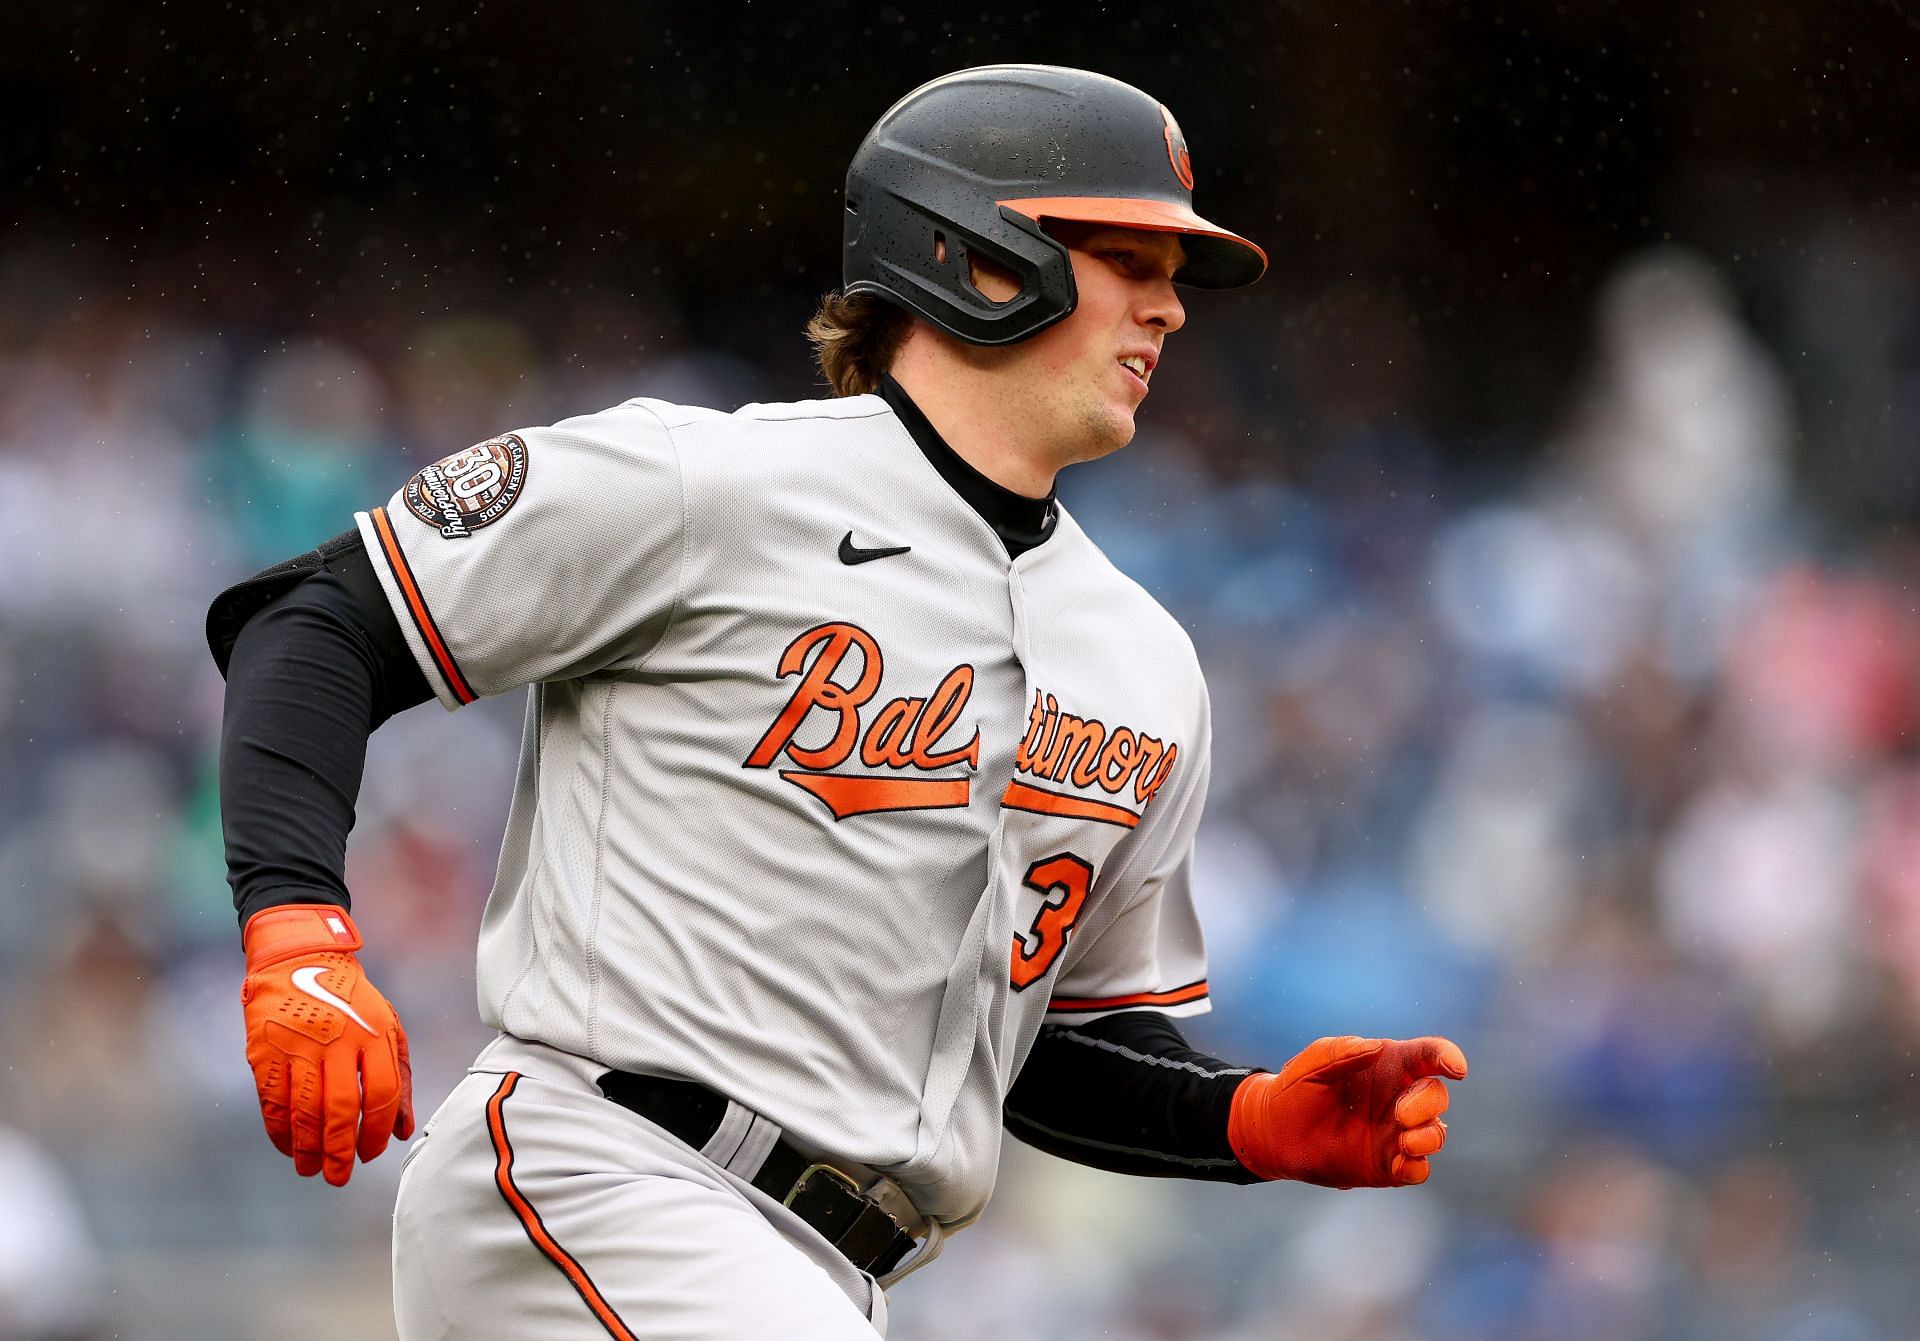 adley rutschman: Adley Rutschman: 3 reasons why Baltimore Orioles backstop  could become the best catcher in the MLB